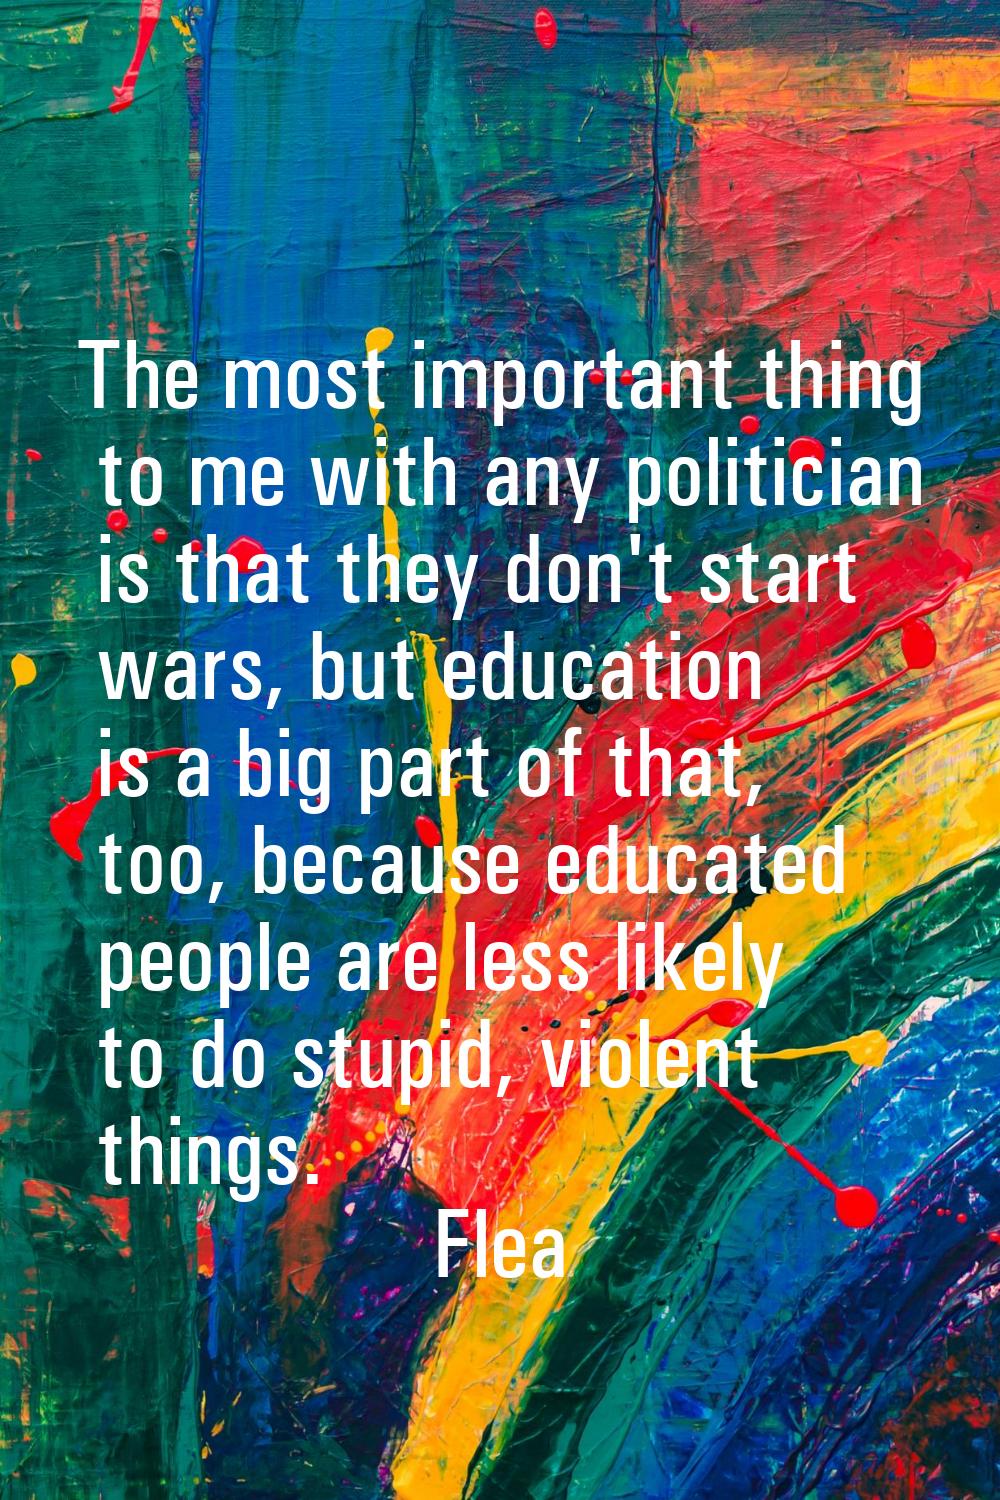 The most important thing to me with any politician is that they don't start wars, but education is 